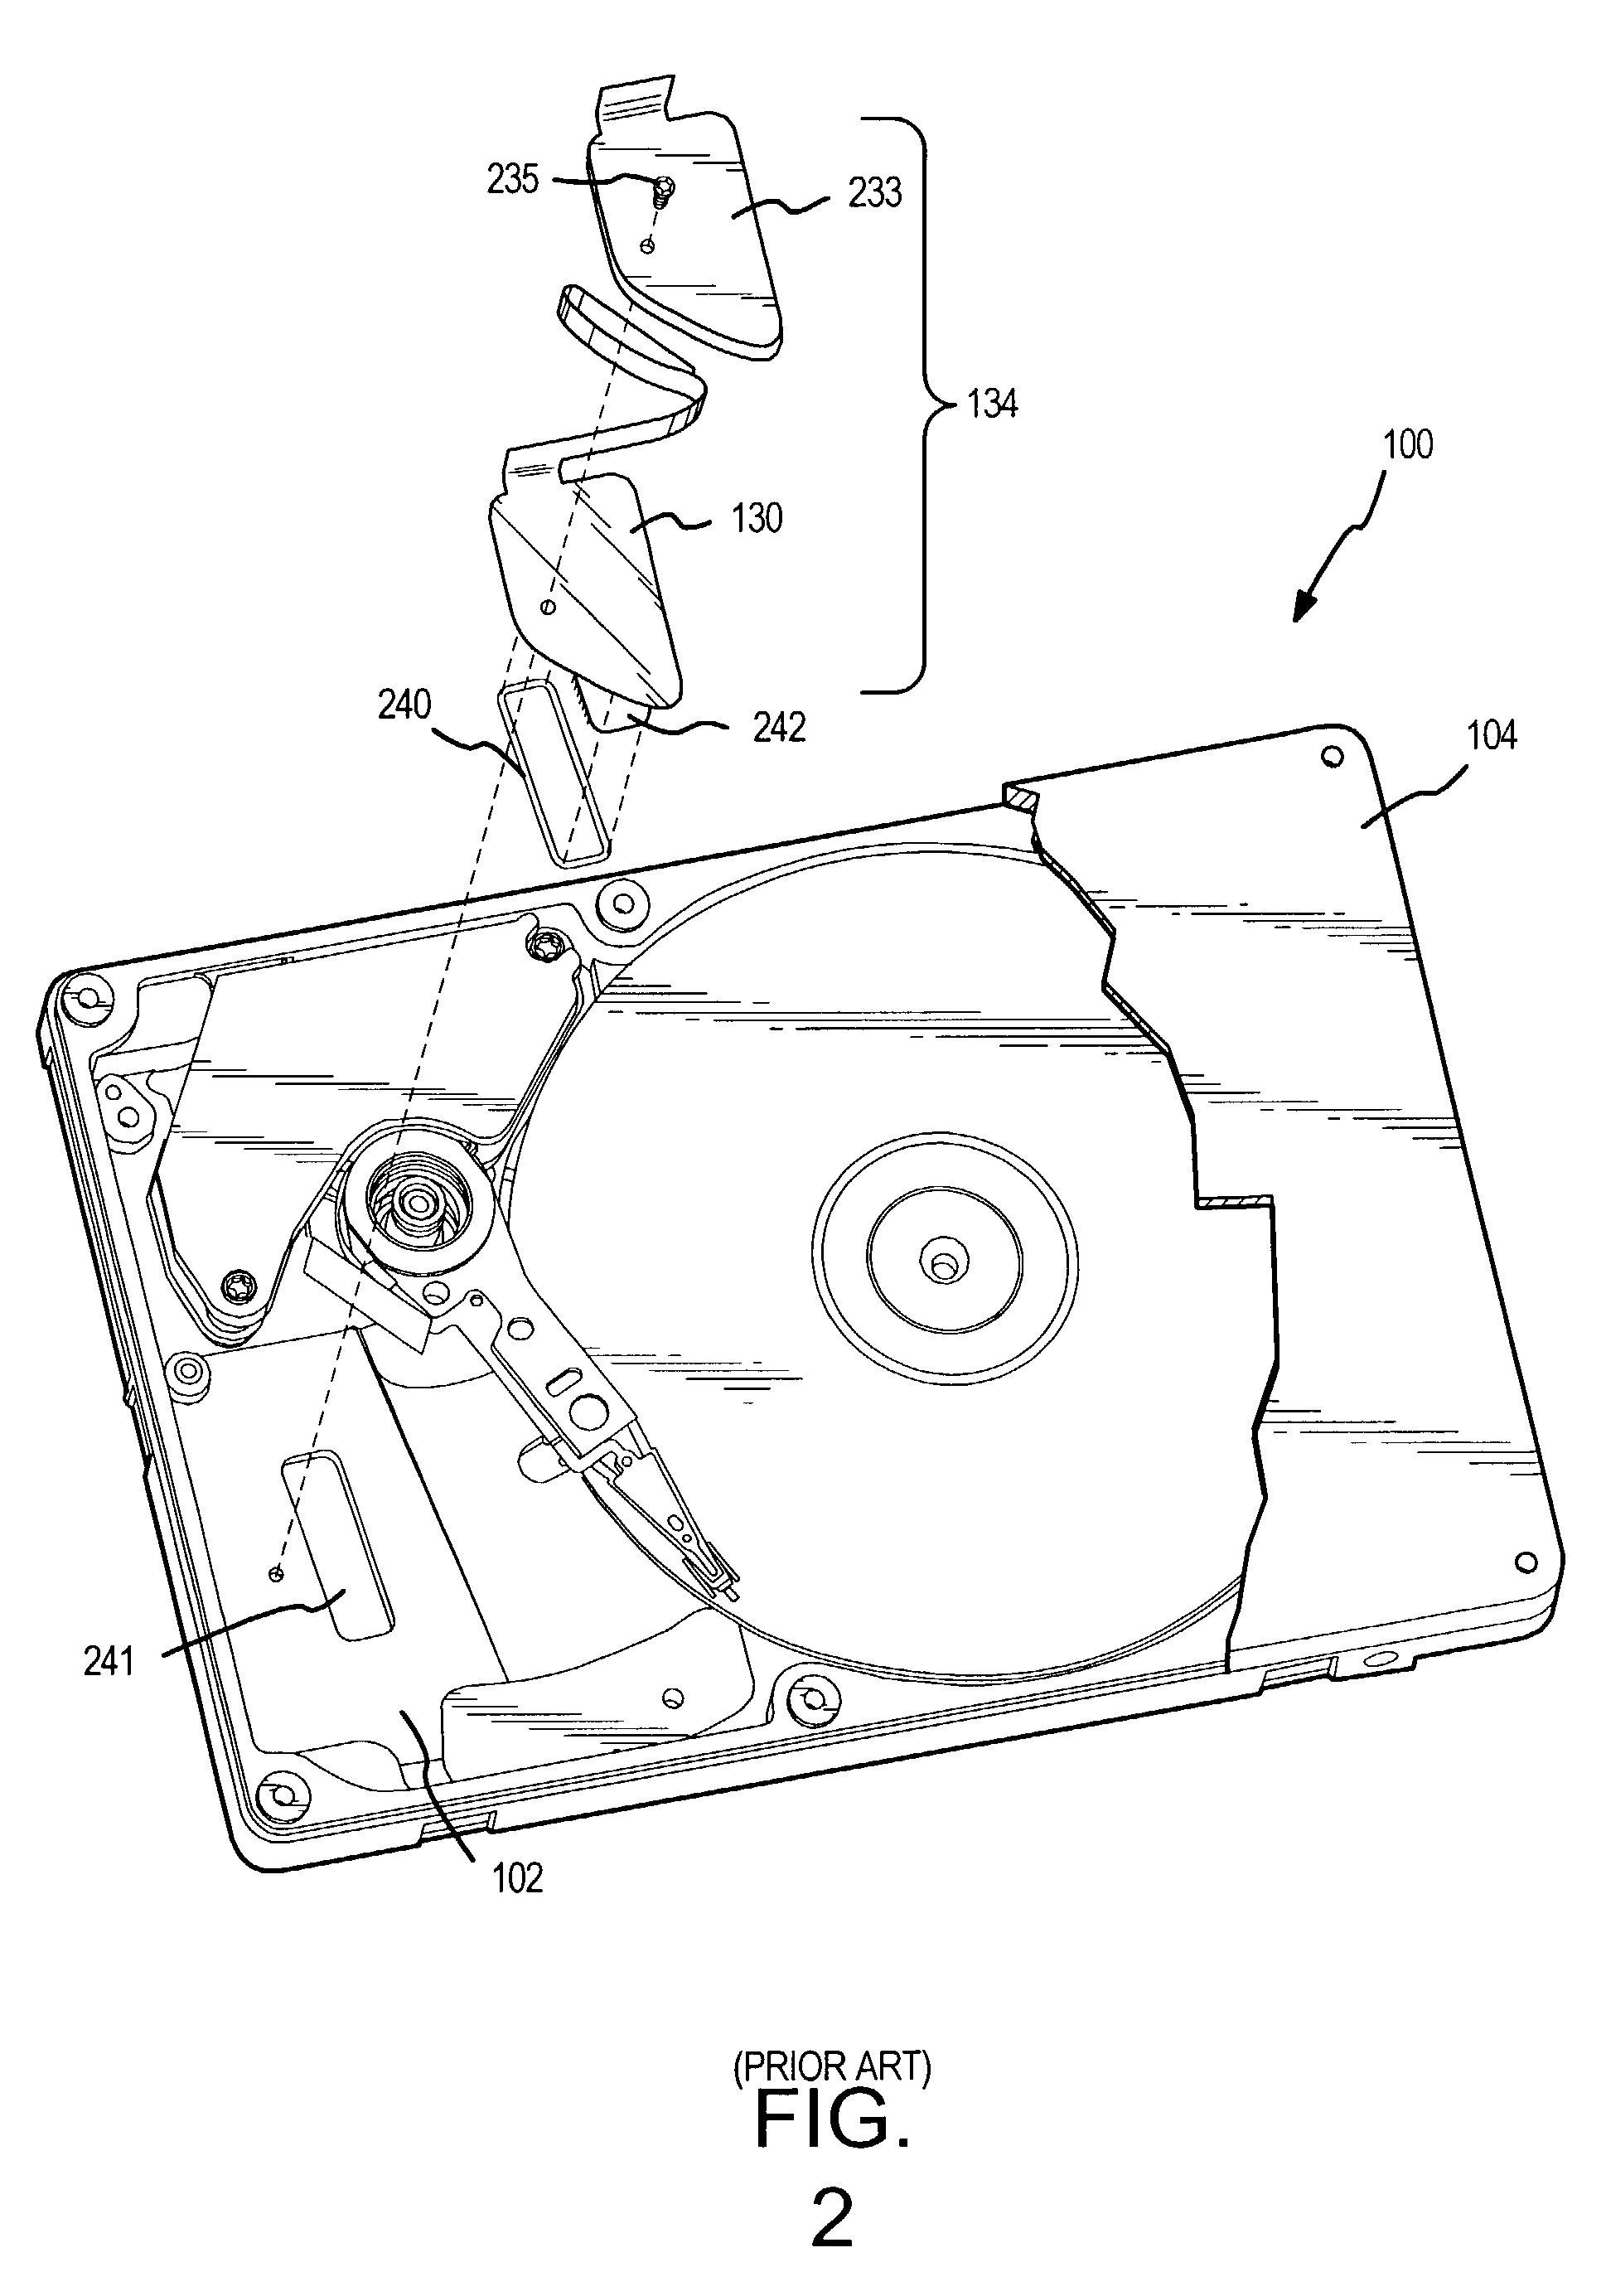 Bulkhead connector for low leak rate disc drives